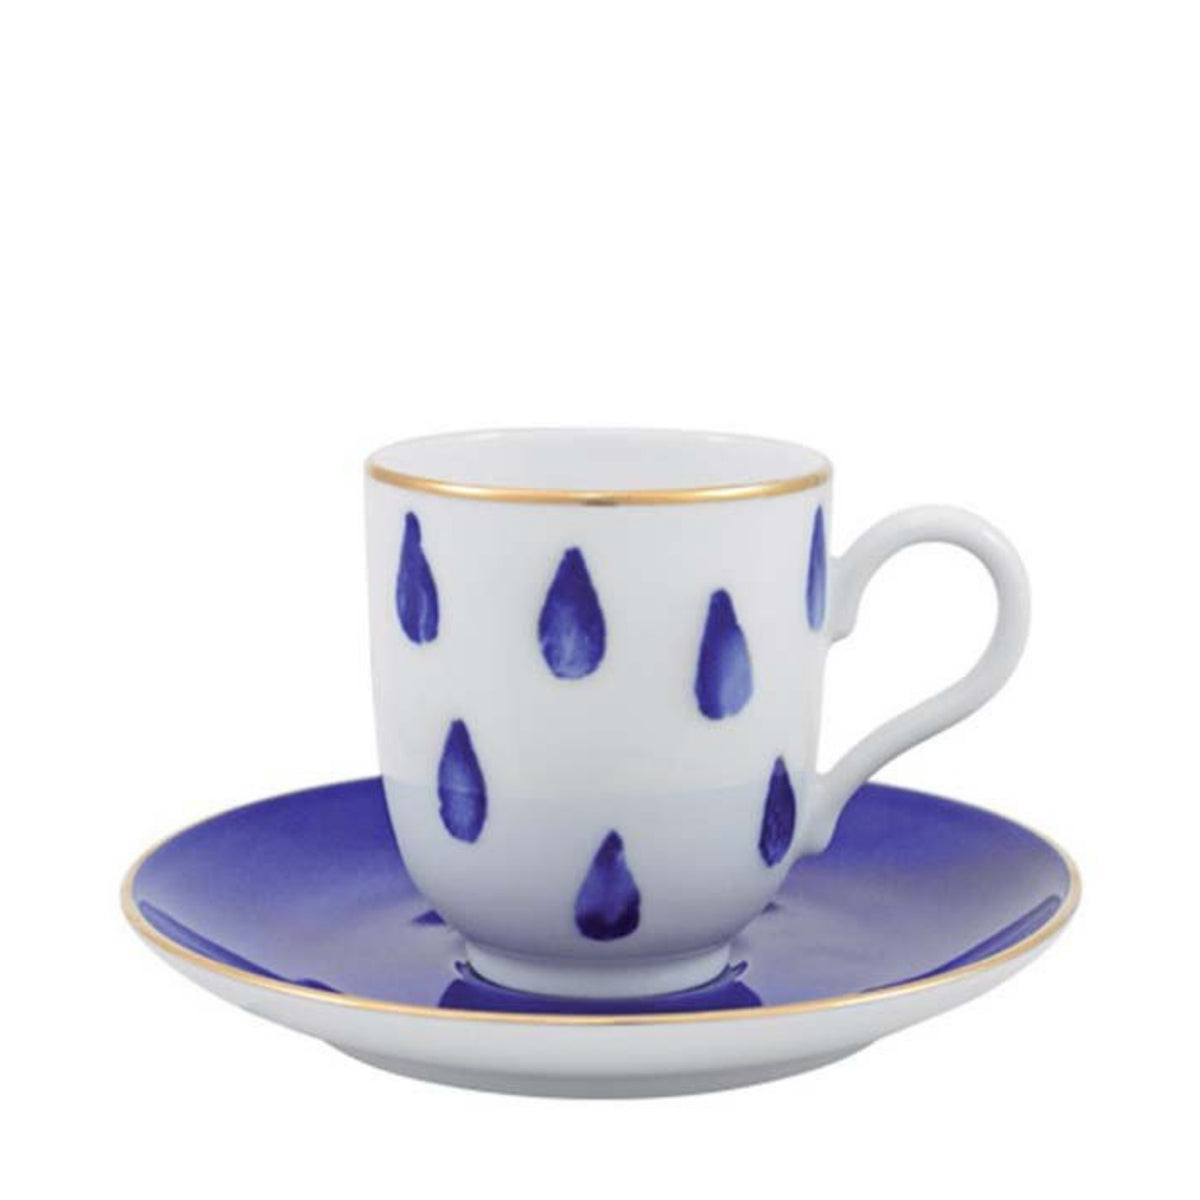 ATLANTICO COFFEE CUP AND SAUCER 11CL